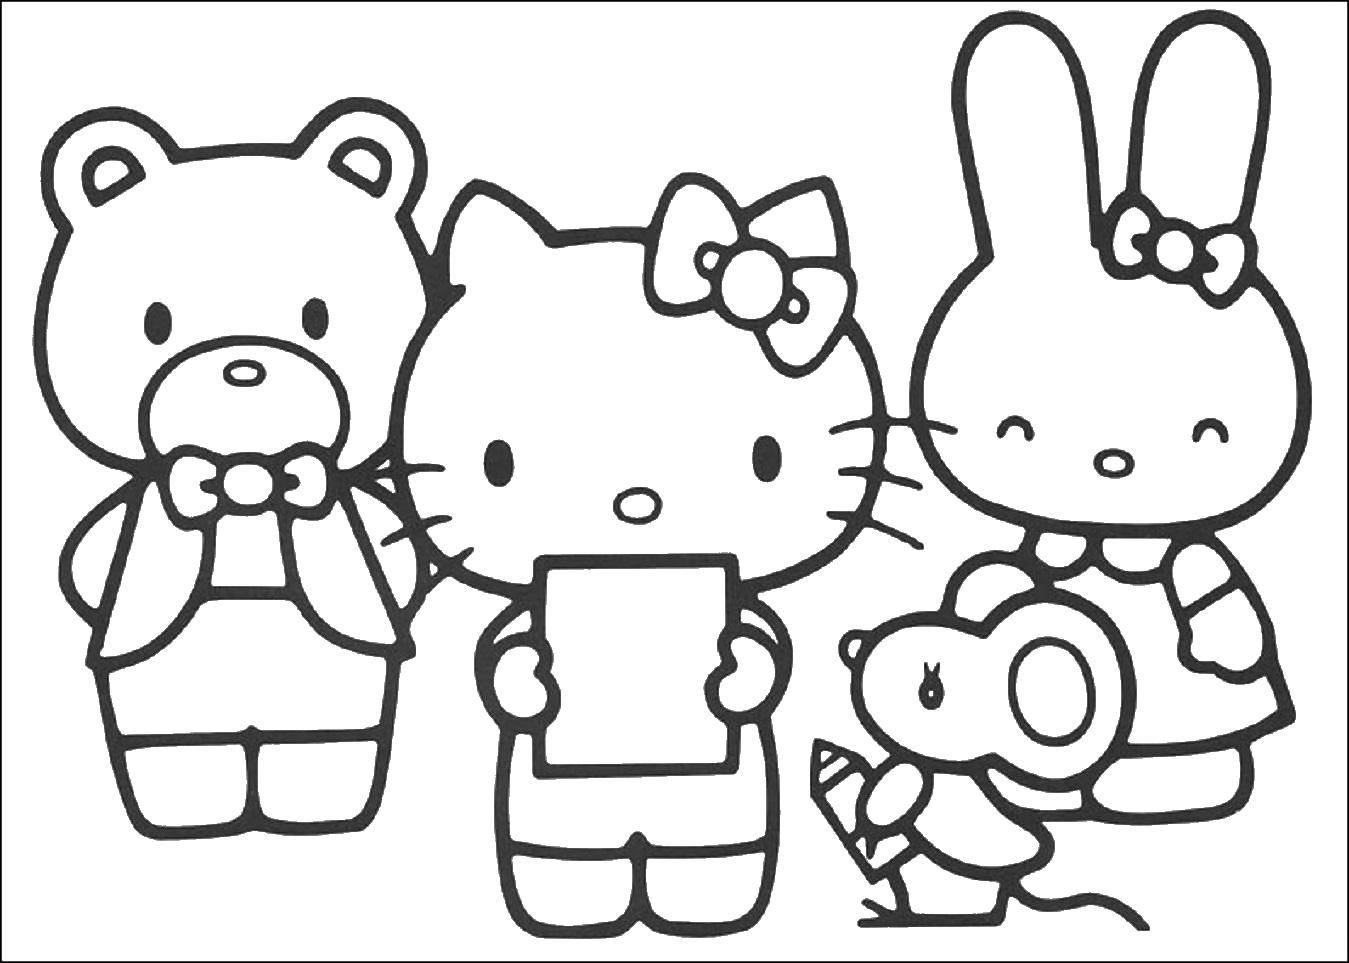 Coloring Kitty stands. Category Hello Kitty. Tags:  Hello Kitty.